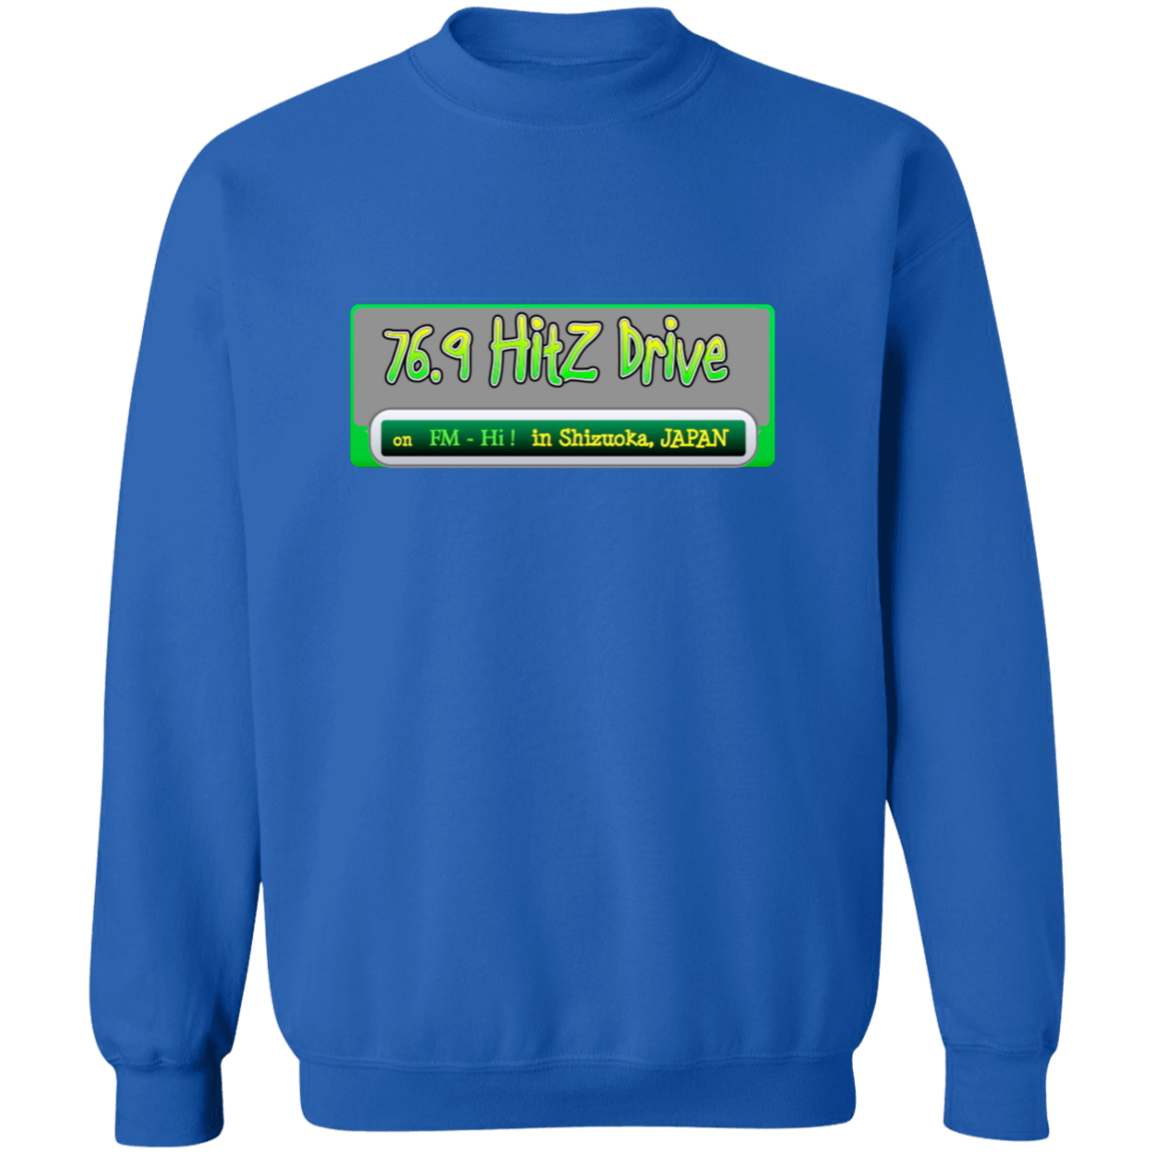 Pullover Sweatshirt  for  the  DRIVE